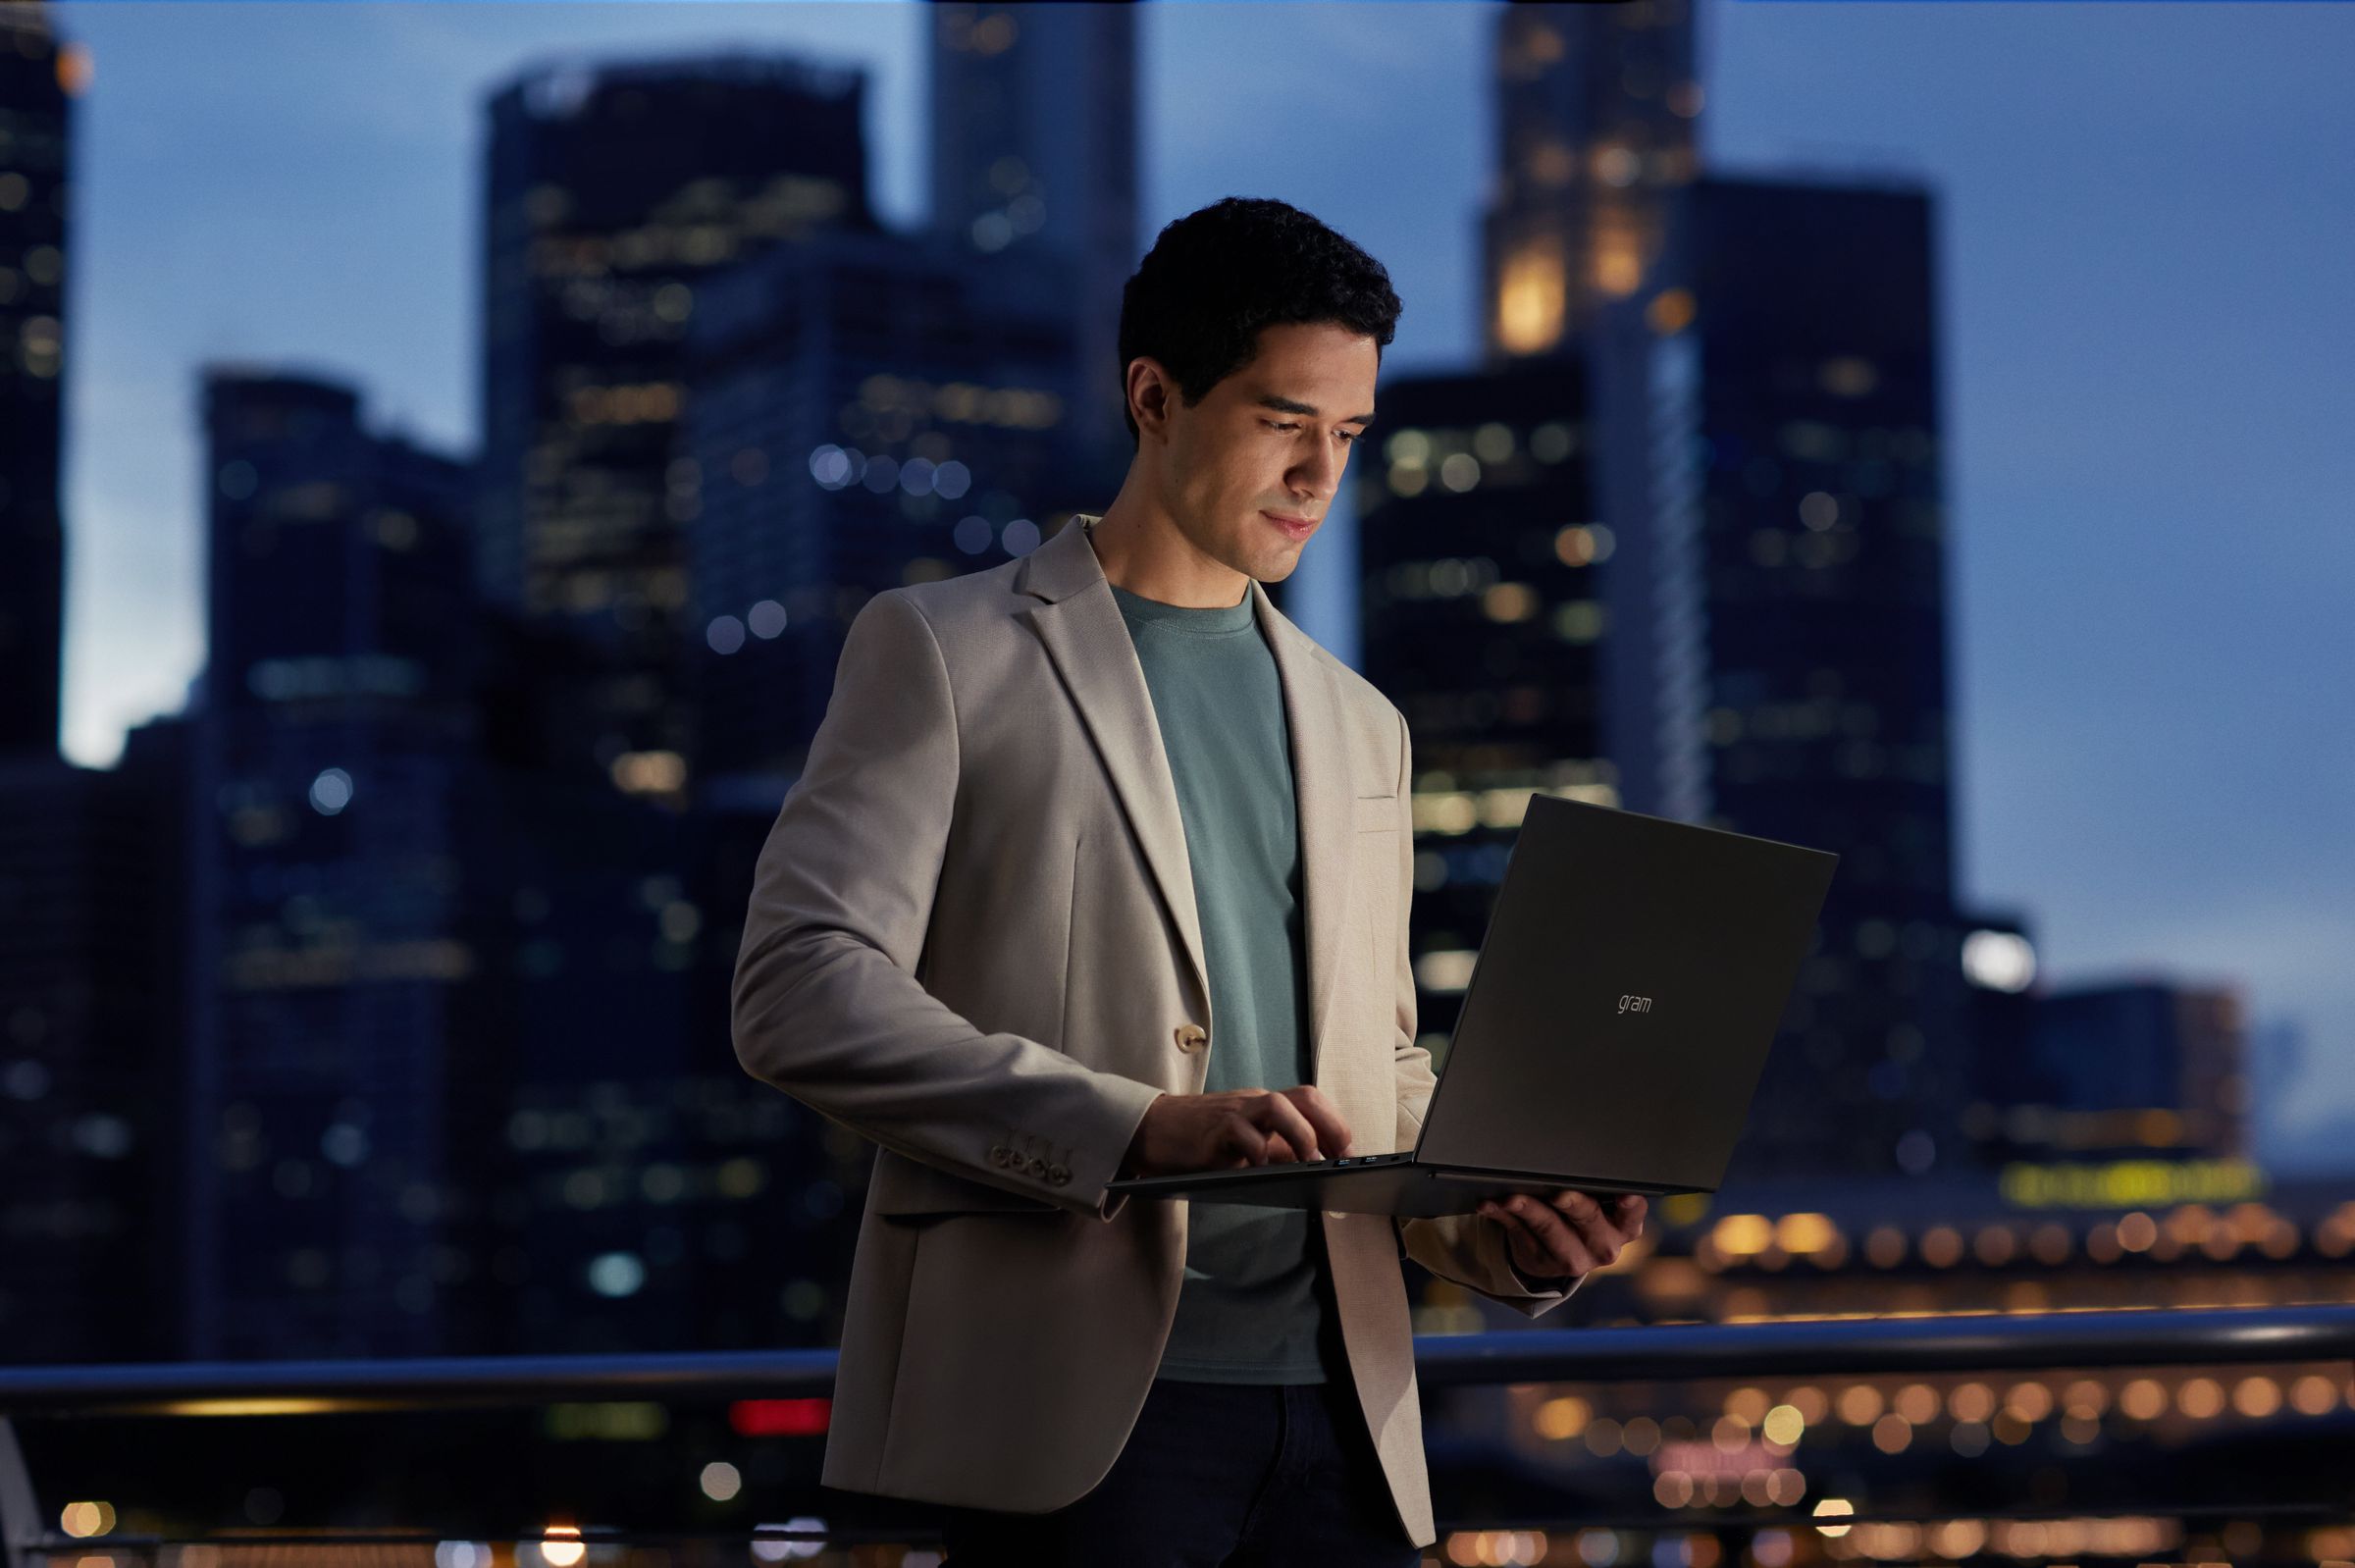 A user works on an LG Gram laptop at night in an urban cityscape setting.